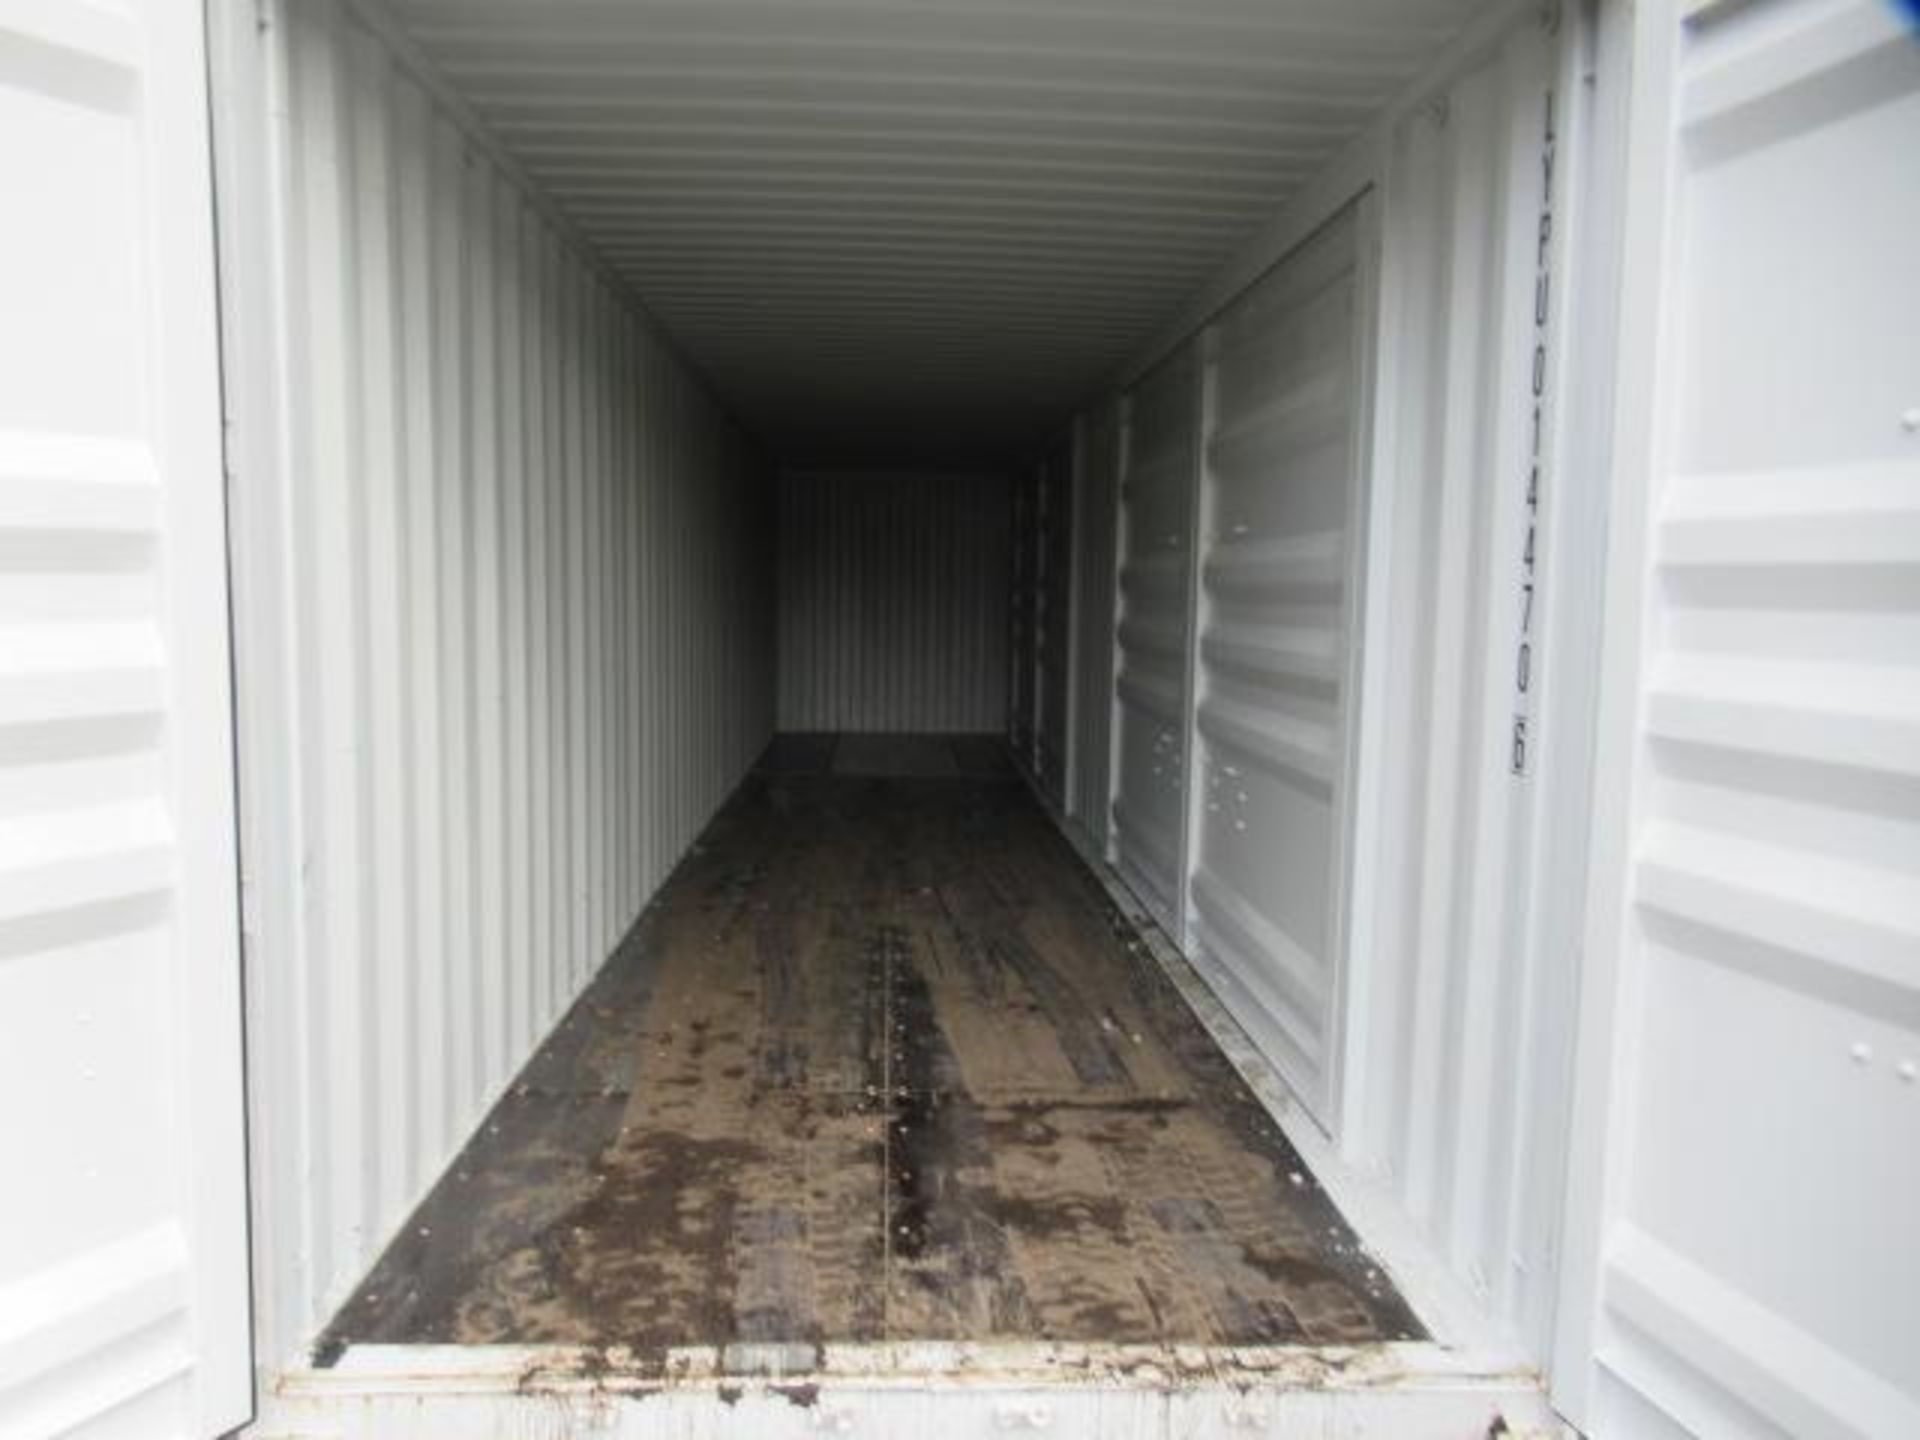 2024 40' HIGH CUBE SHIPPING CONTAINER W/ (2) SIDE DOORS, SER#: LYPU0144706 (UNUSED) - Image 5 of 6